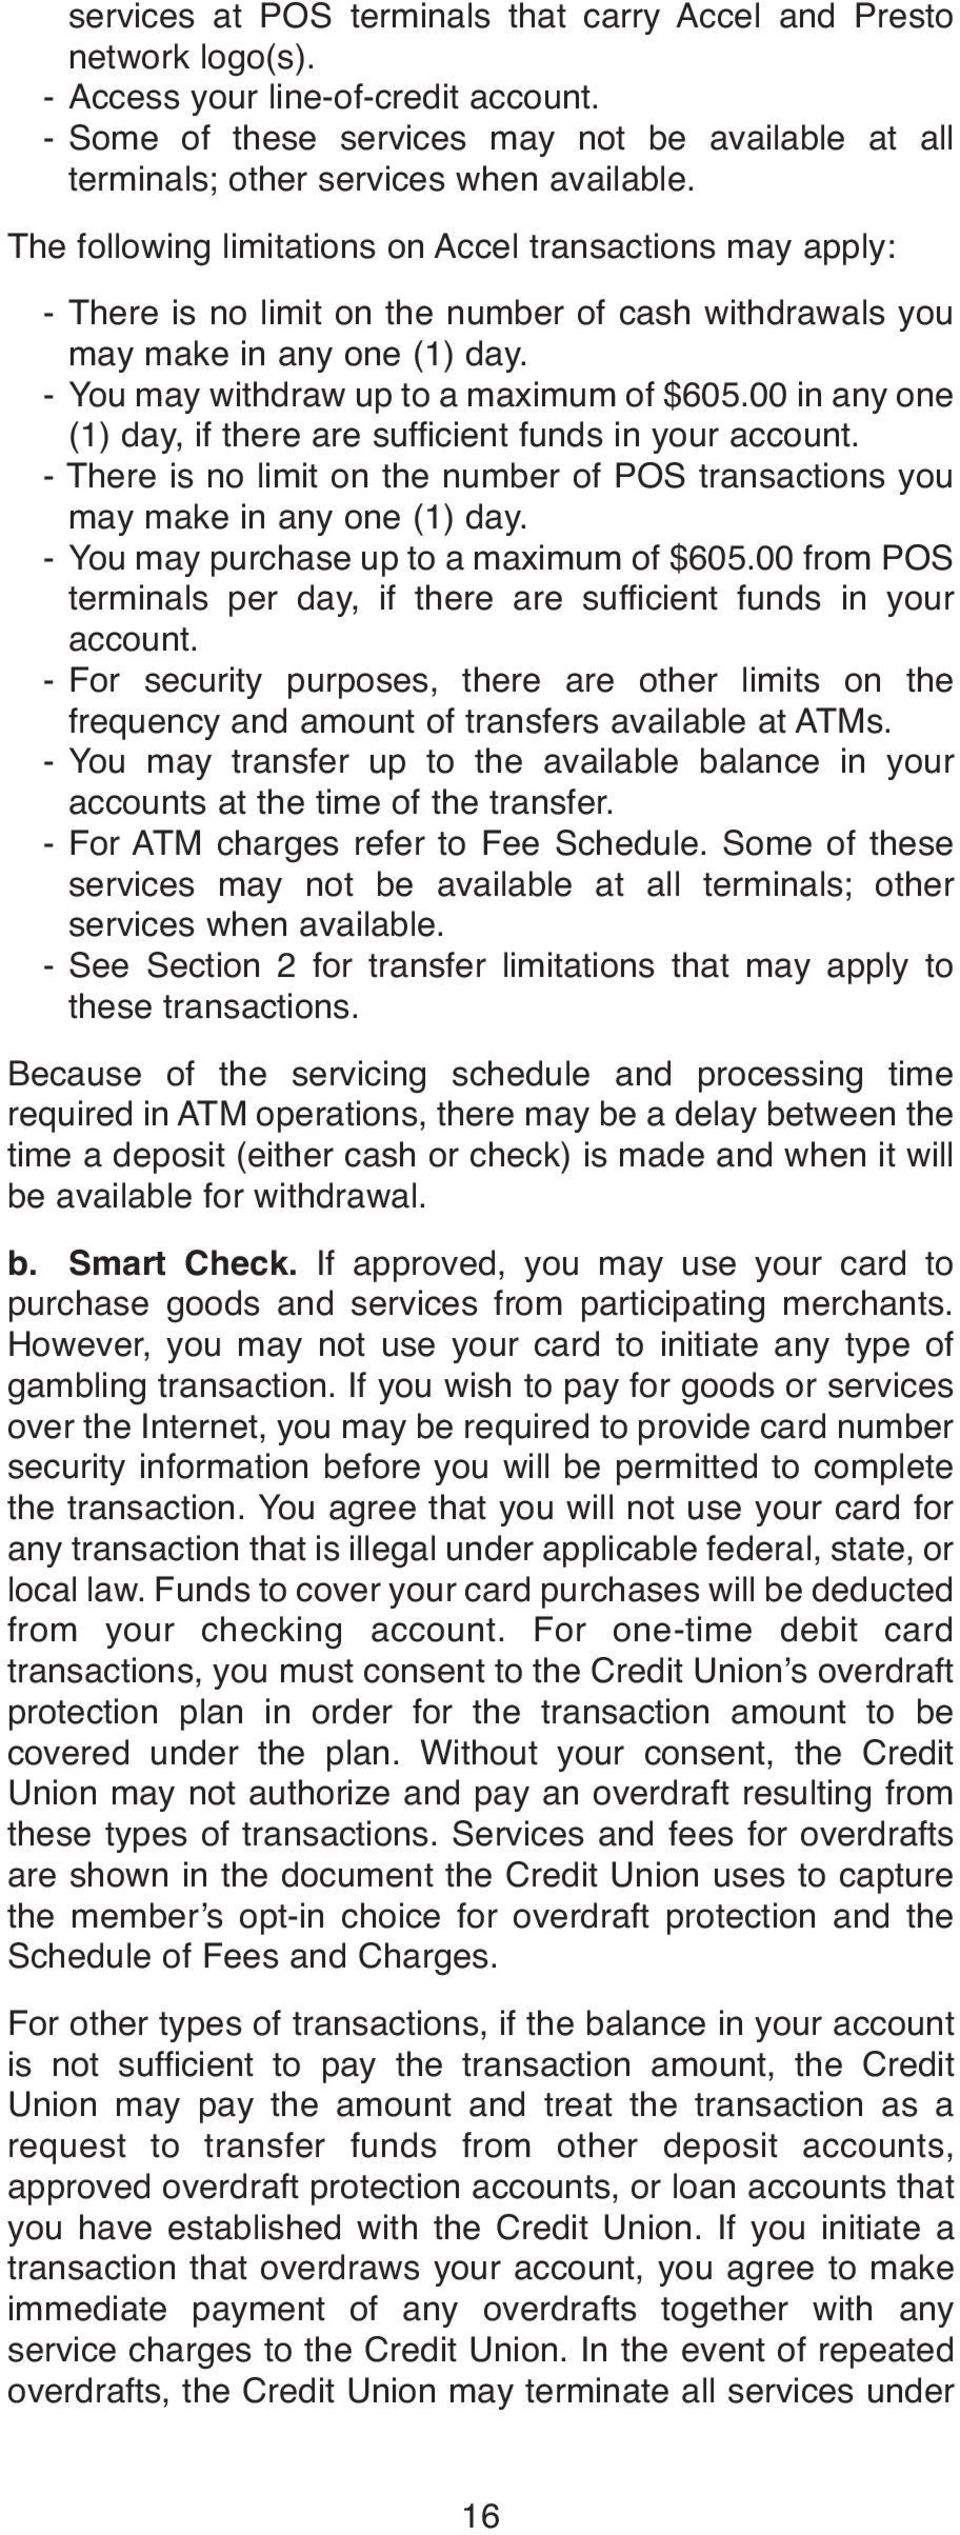 The following limitations on Accel transactions may apply: - There is no limit on the number of cash withdrawals you may make in any one (1) day. - You may withdraw up to a maximum of $605.